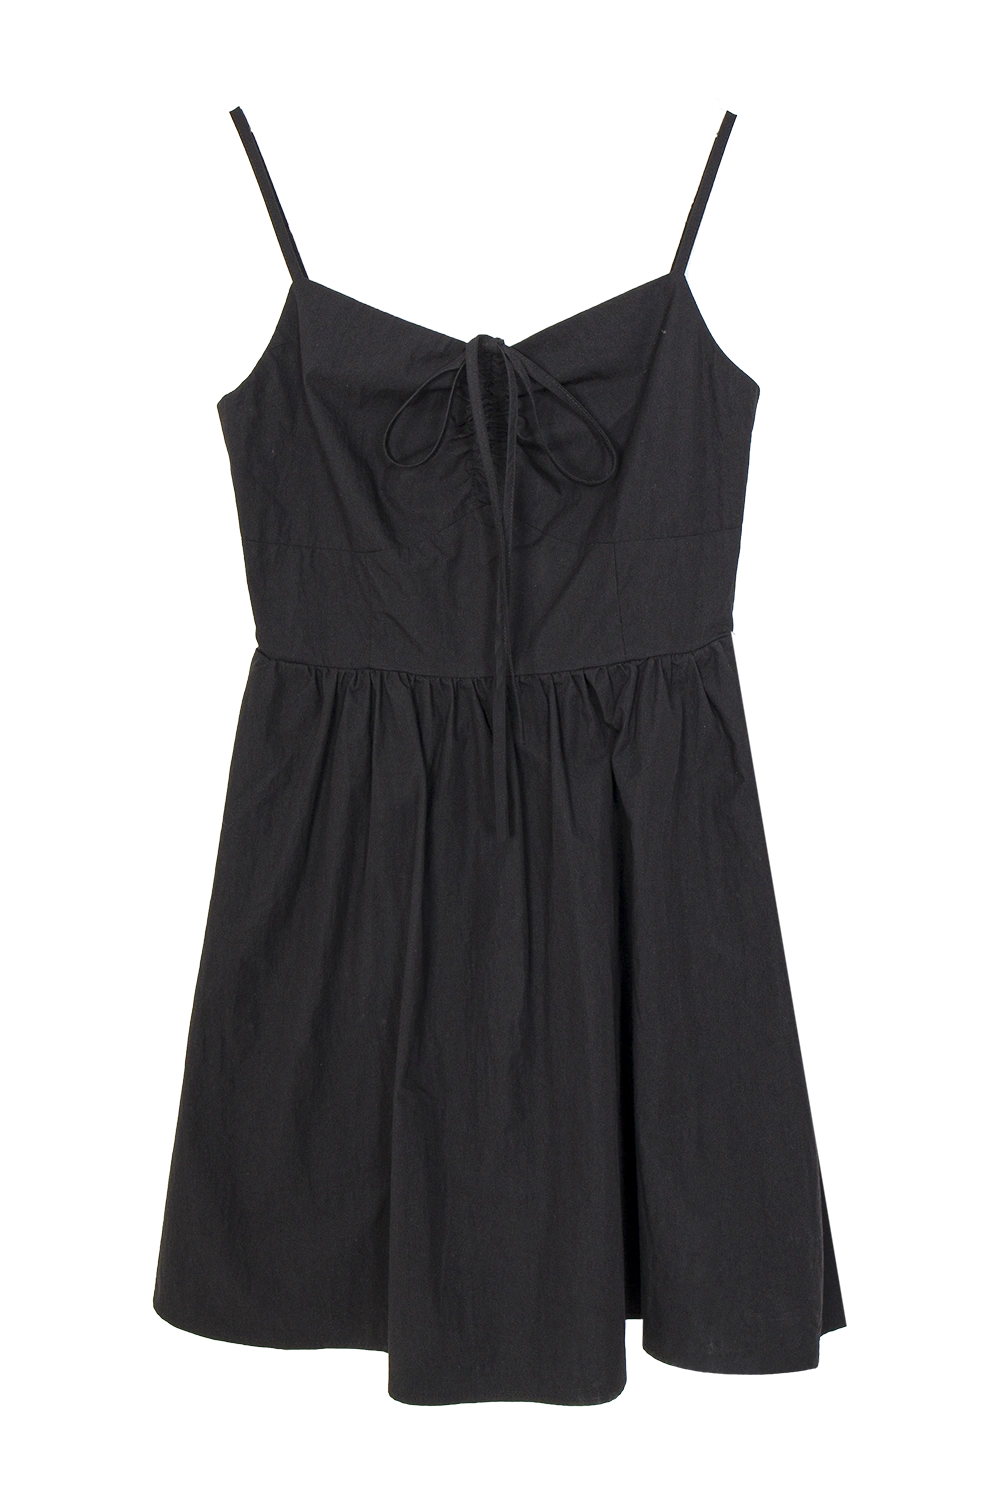 Summer Sundress with Tie Straps and Cinched Waist